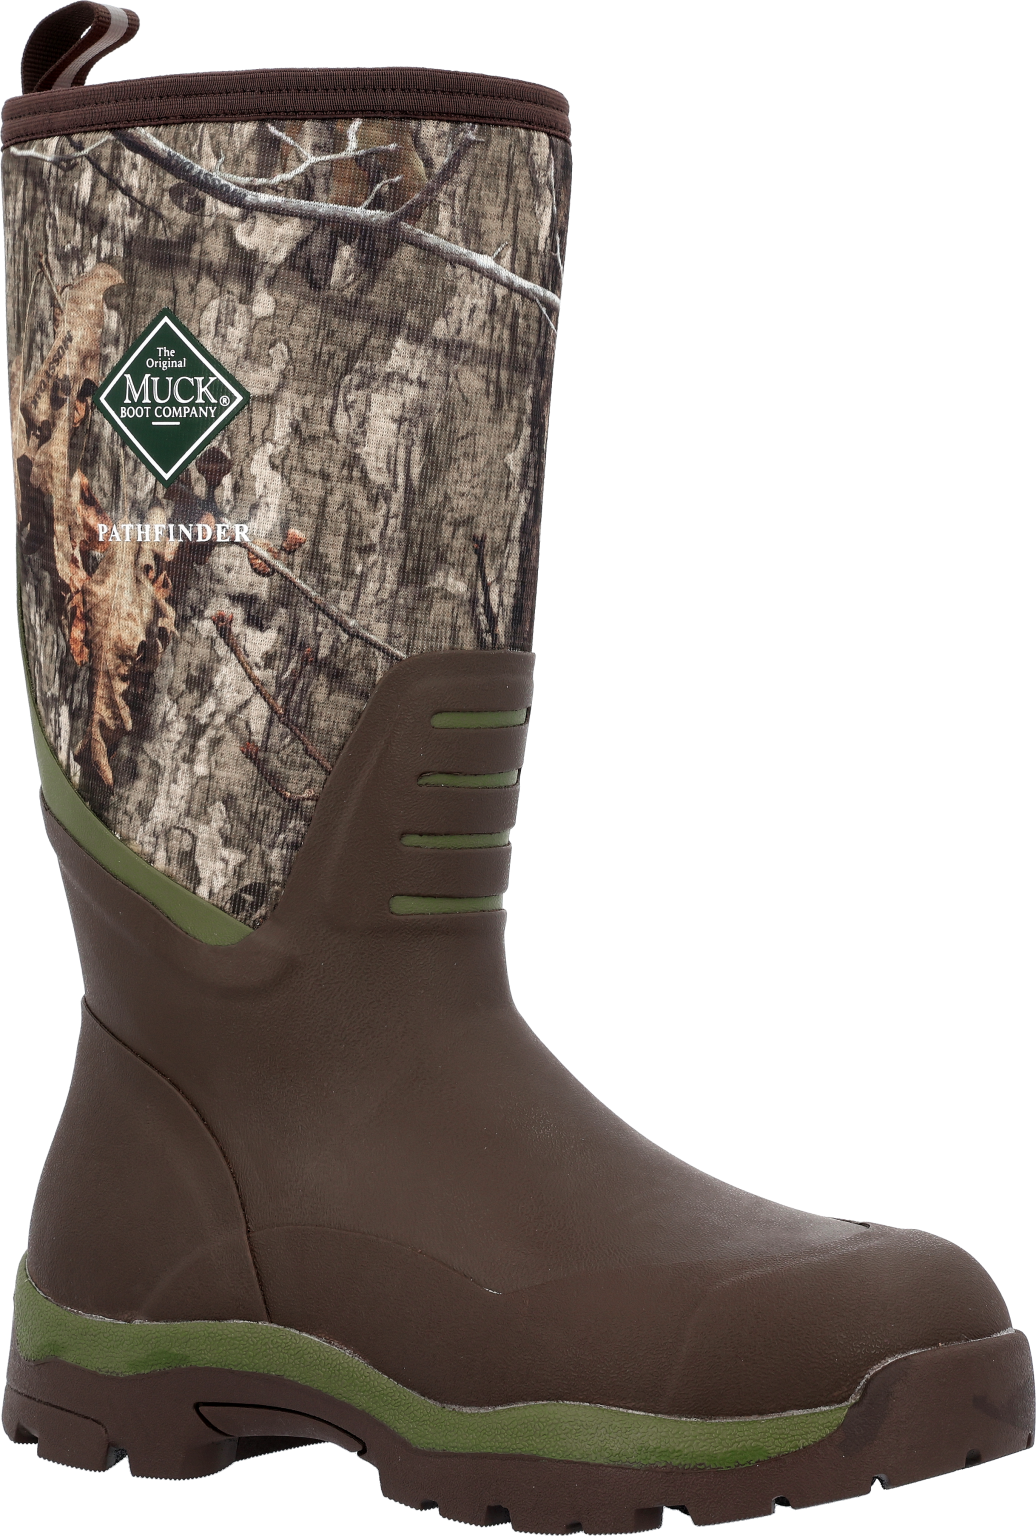 Muck Boots To Introduce Terra Collection And Pathfinder For Fall 2023 ...